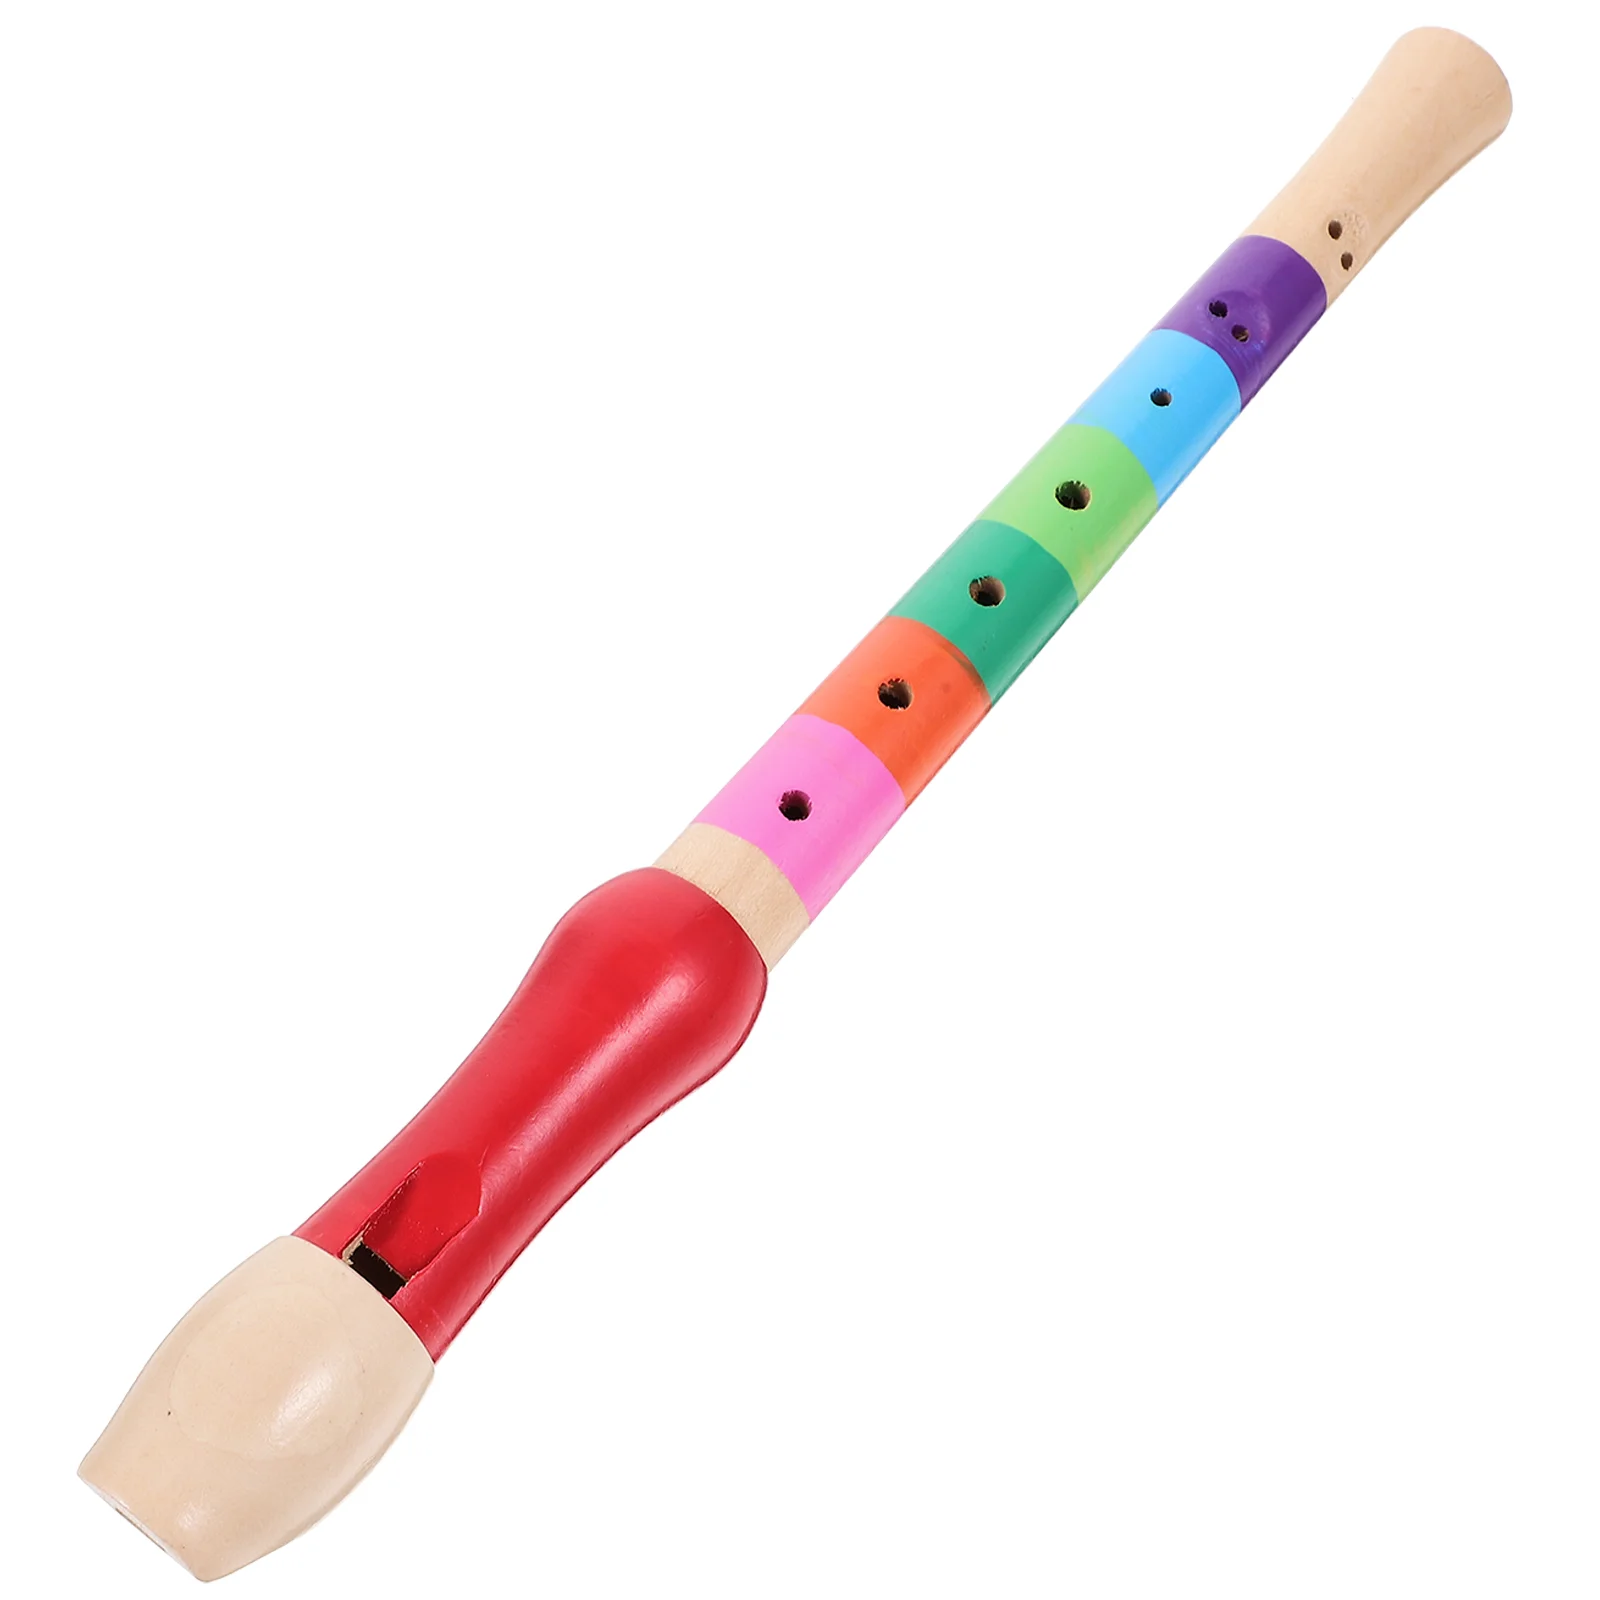 

8 Hole Wood Soprano Descant Recorder Flute Music Playing Wind Instruments (Color random) Musical climber